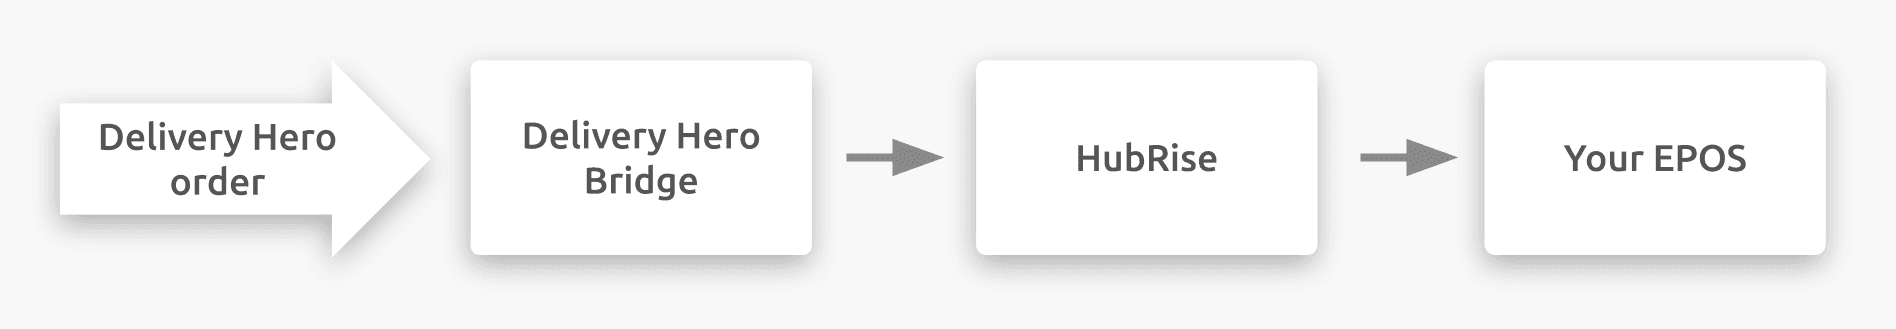 Diagram of the connection workflow between Delivery Hero, Delivery Hero Bridge, and HubRise